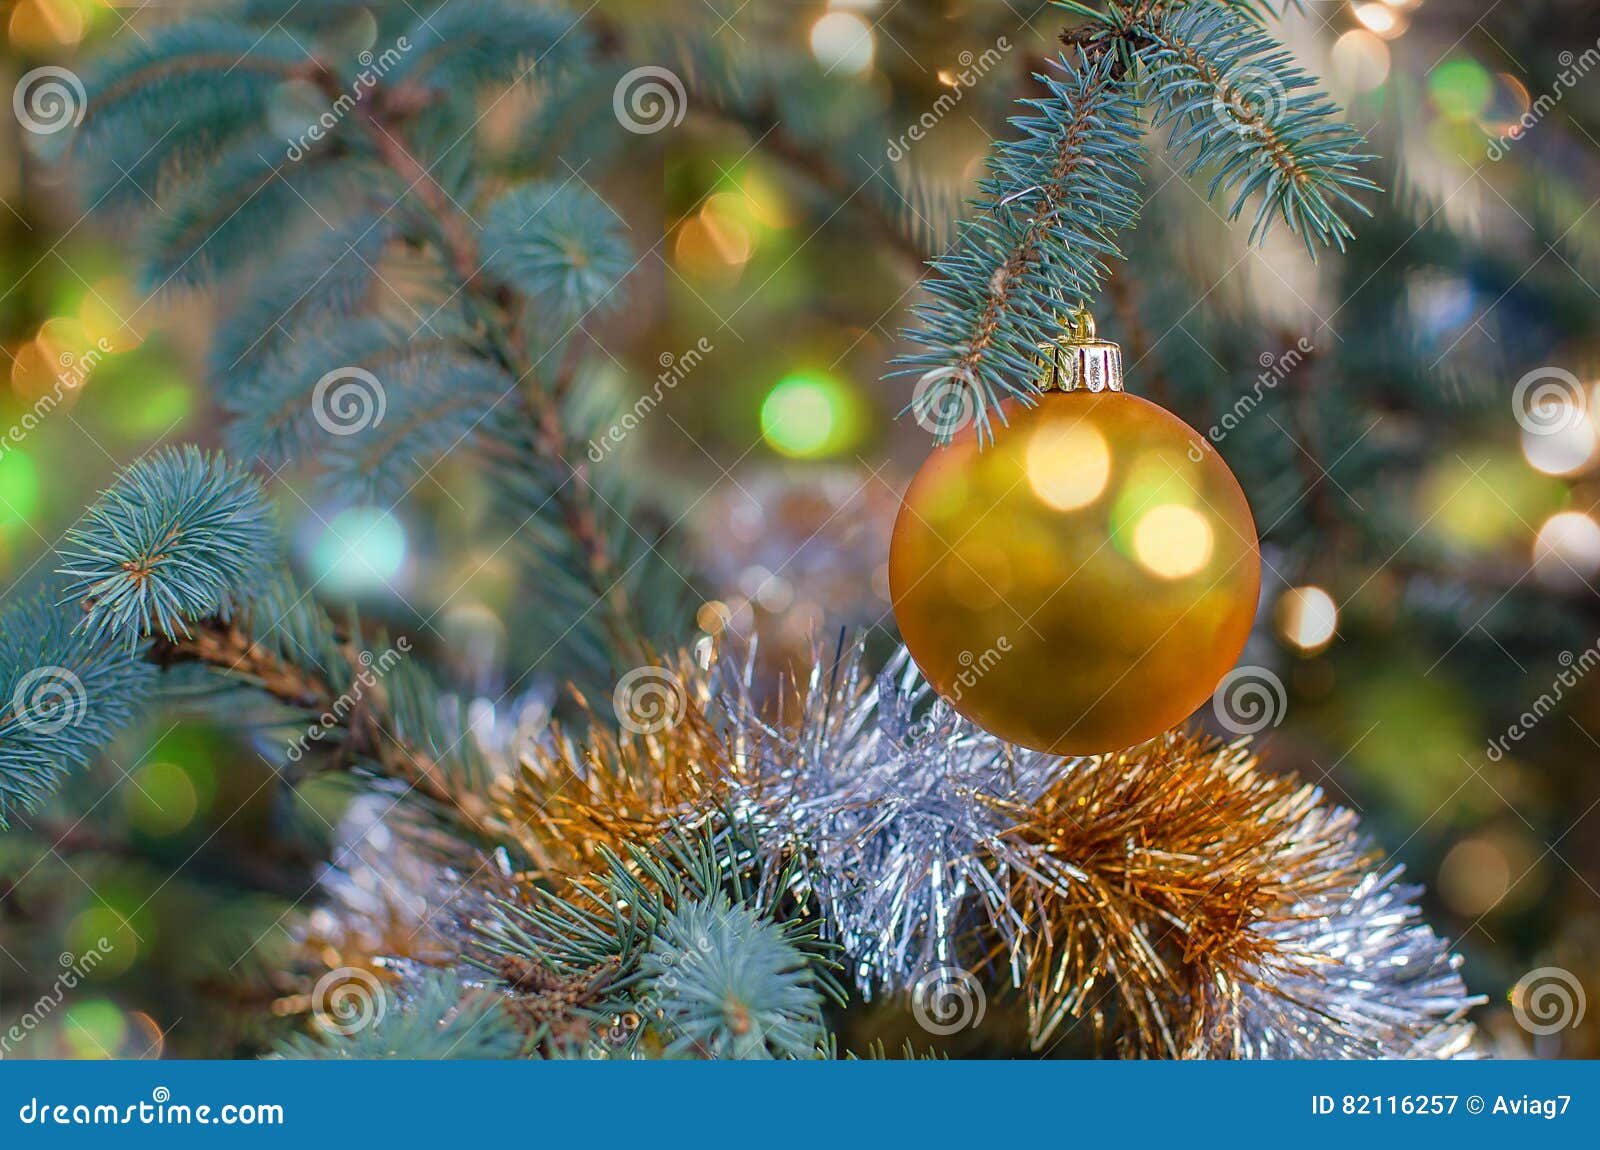 Christmas Yellow Decoration Ornament Stock Image - Image of winter ...